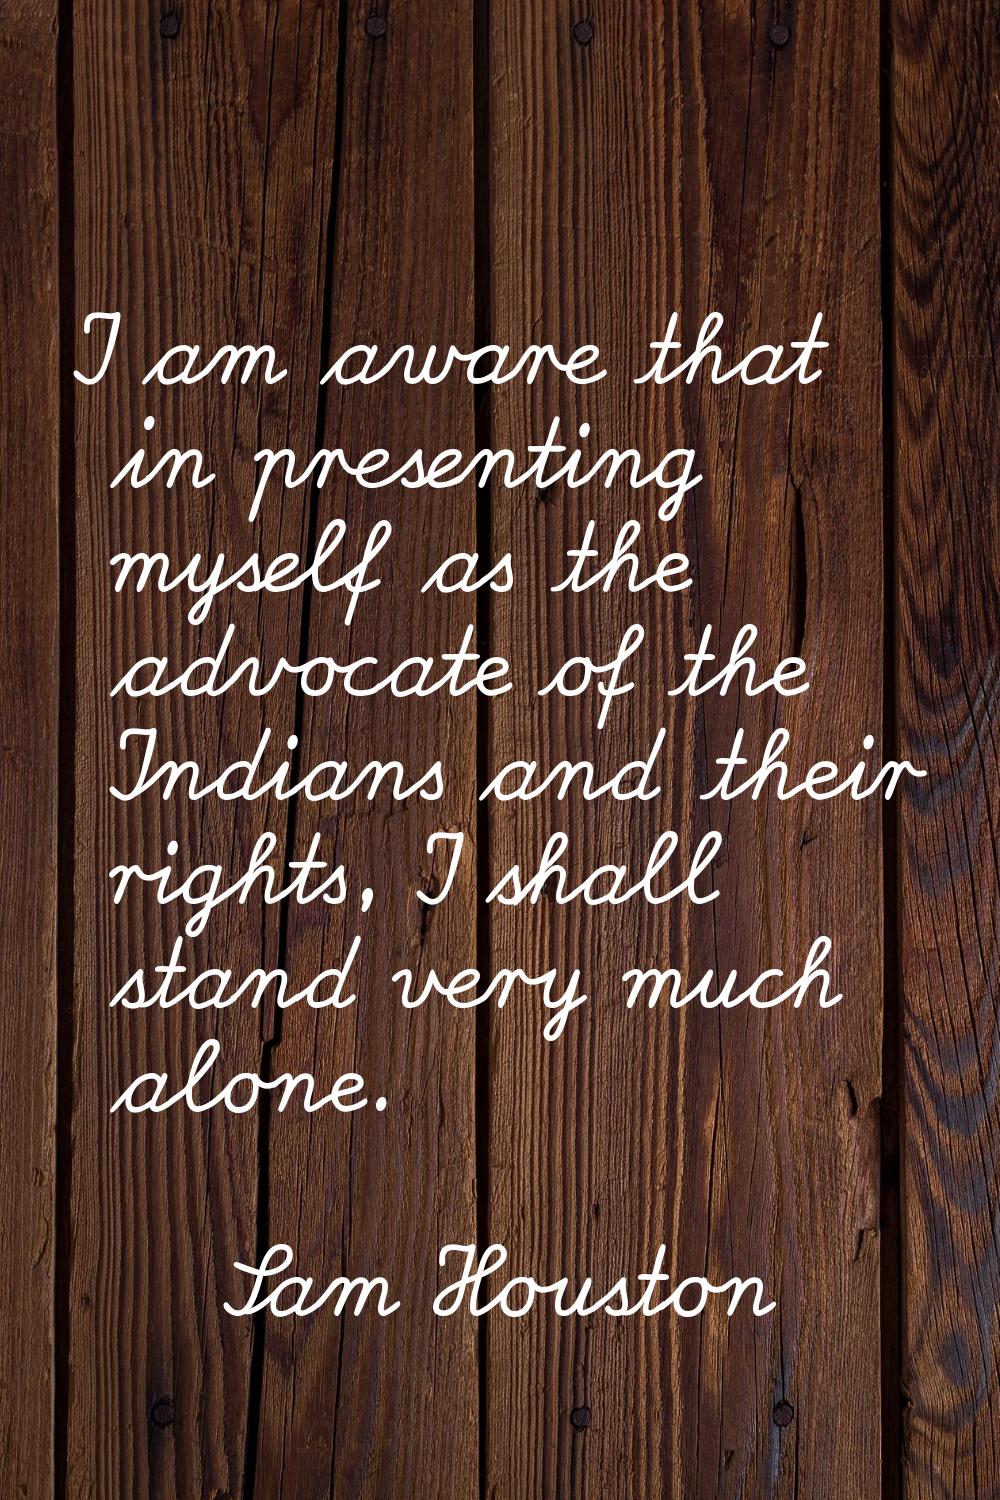 I am aware that in presenting myself as the advocate of the Indians and their rights, I shall stand